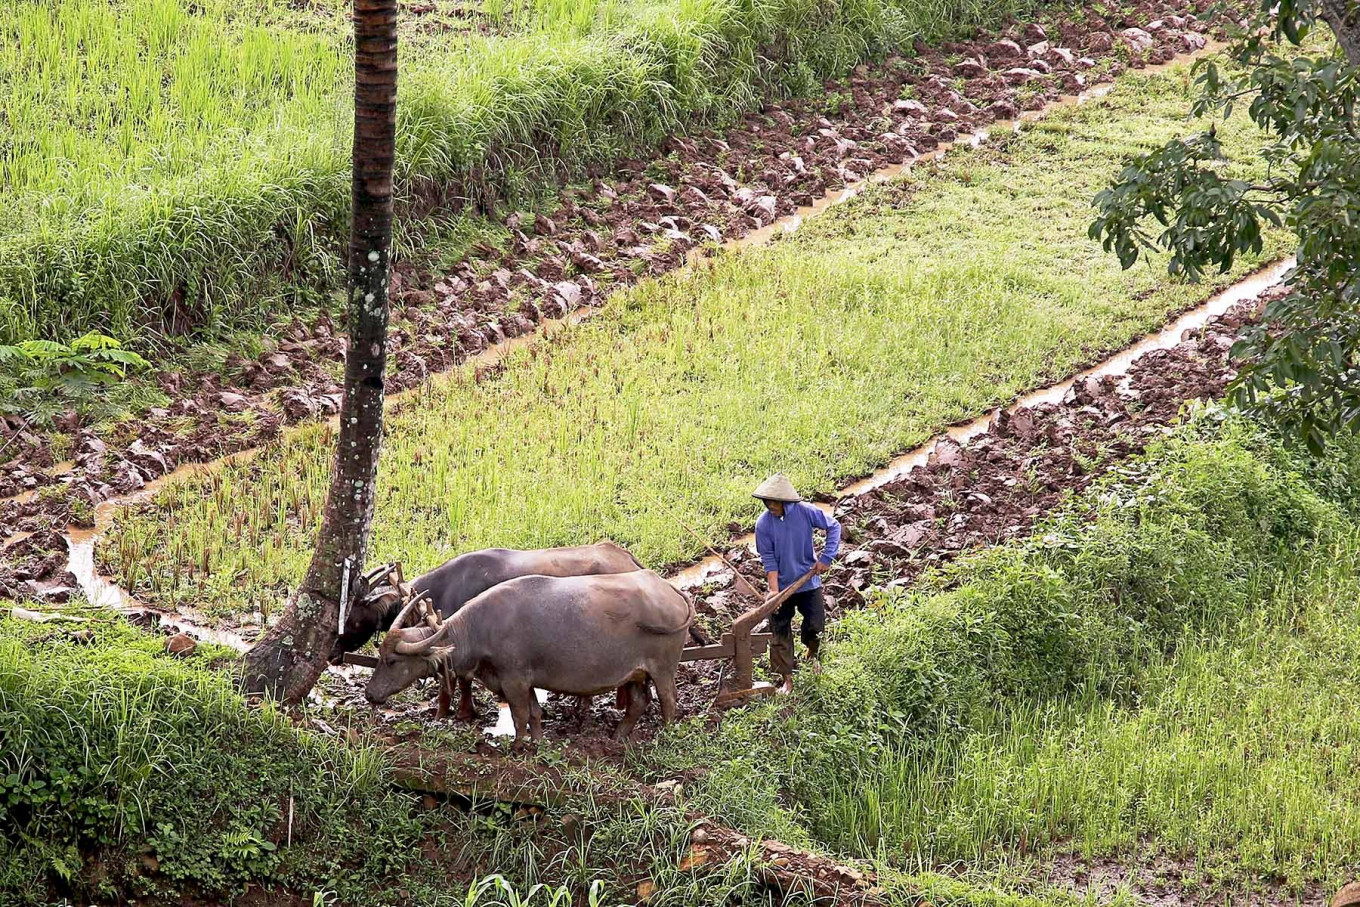 A farmer plows rice fields using two buffaloes near a rest area of the Bawean-Salatiga toll road in Central Java on Nov. 2. Ahead of the rainy season, farmers have begun preparing for the next crop of rice. (Photo Credit: JP/PJ Leo)